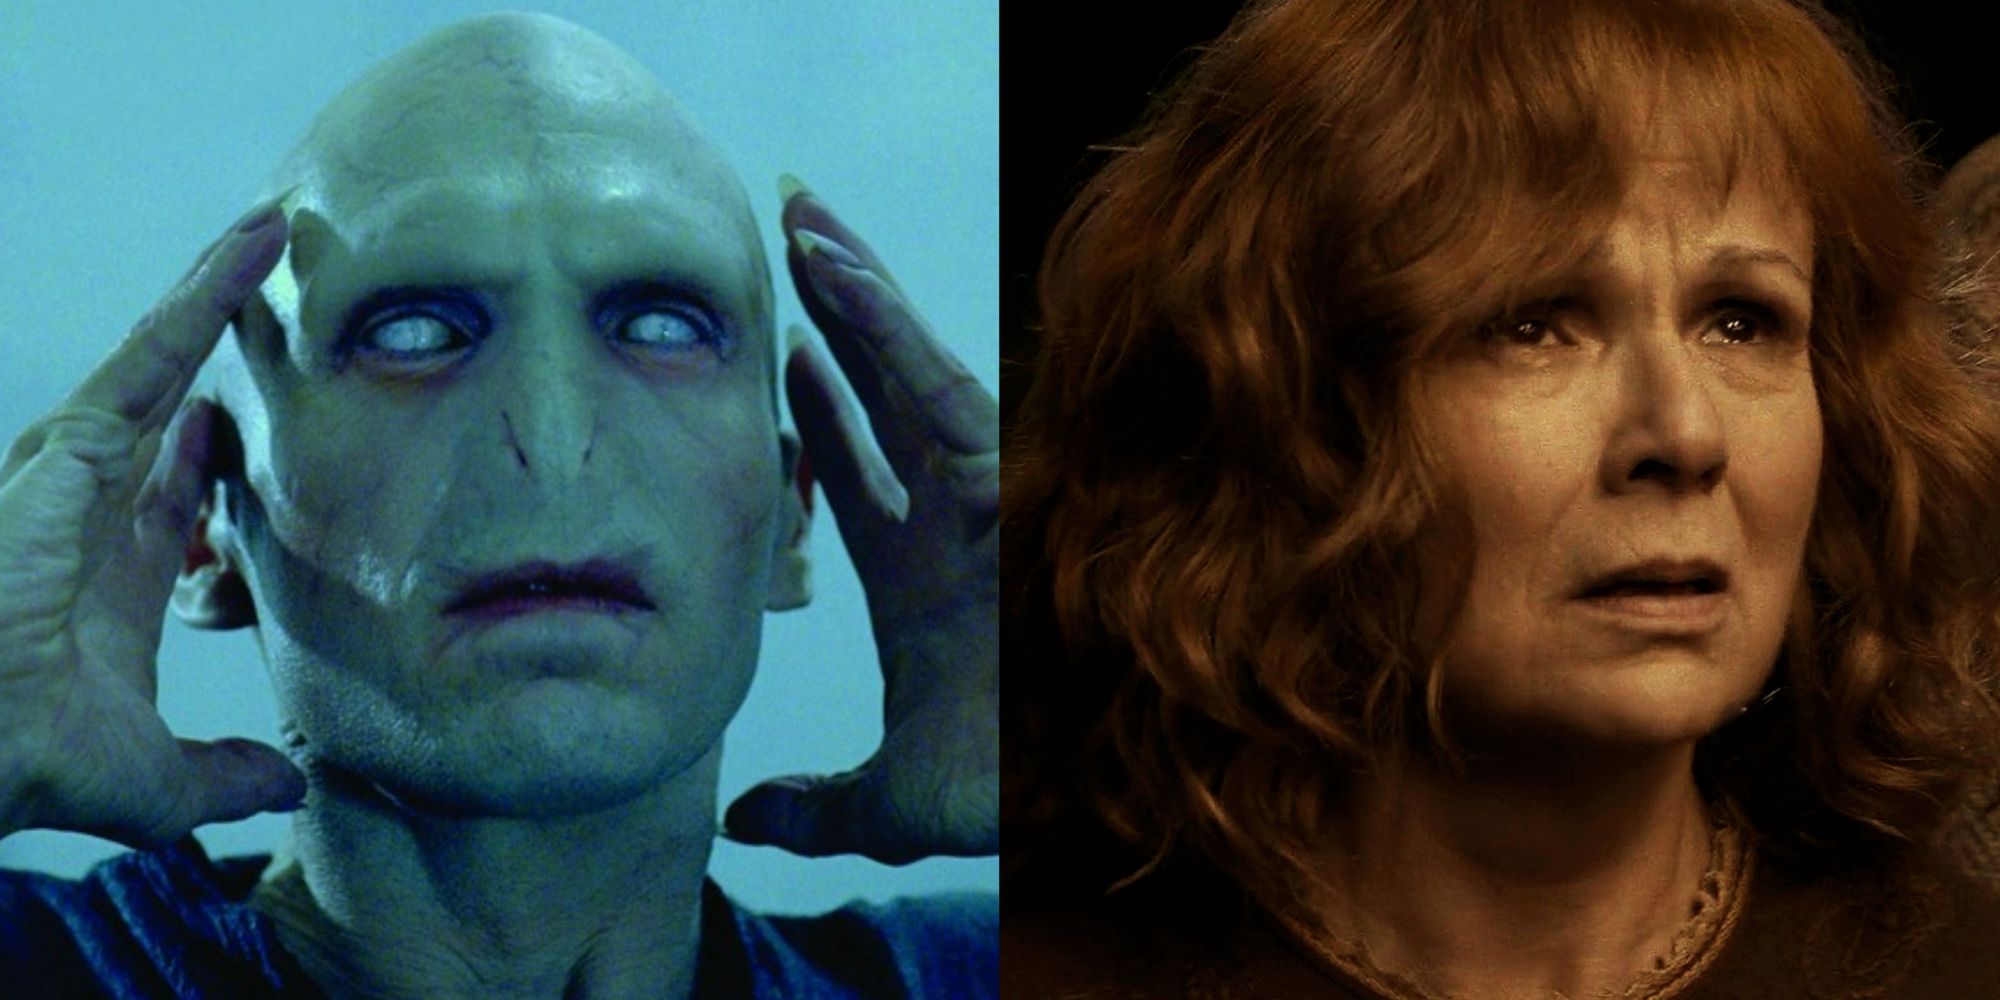 A split image showing Voldemort on the left and Molly Weasley on the right from Harry Potter. 